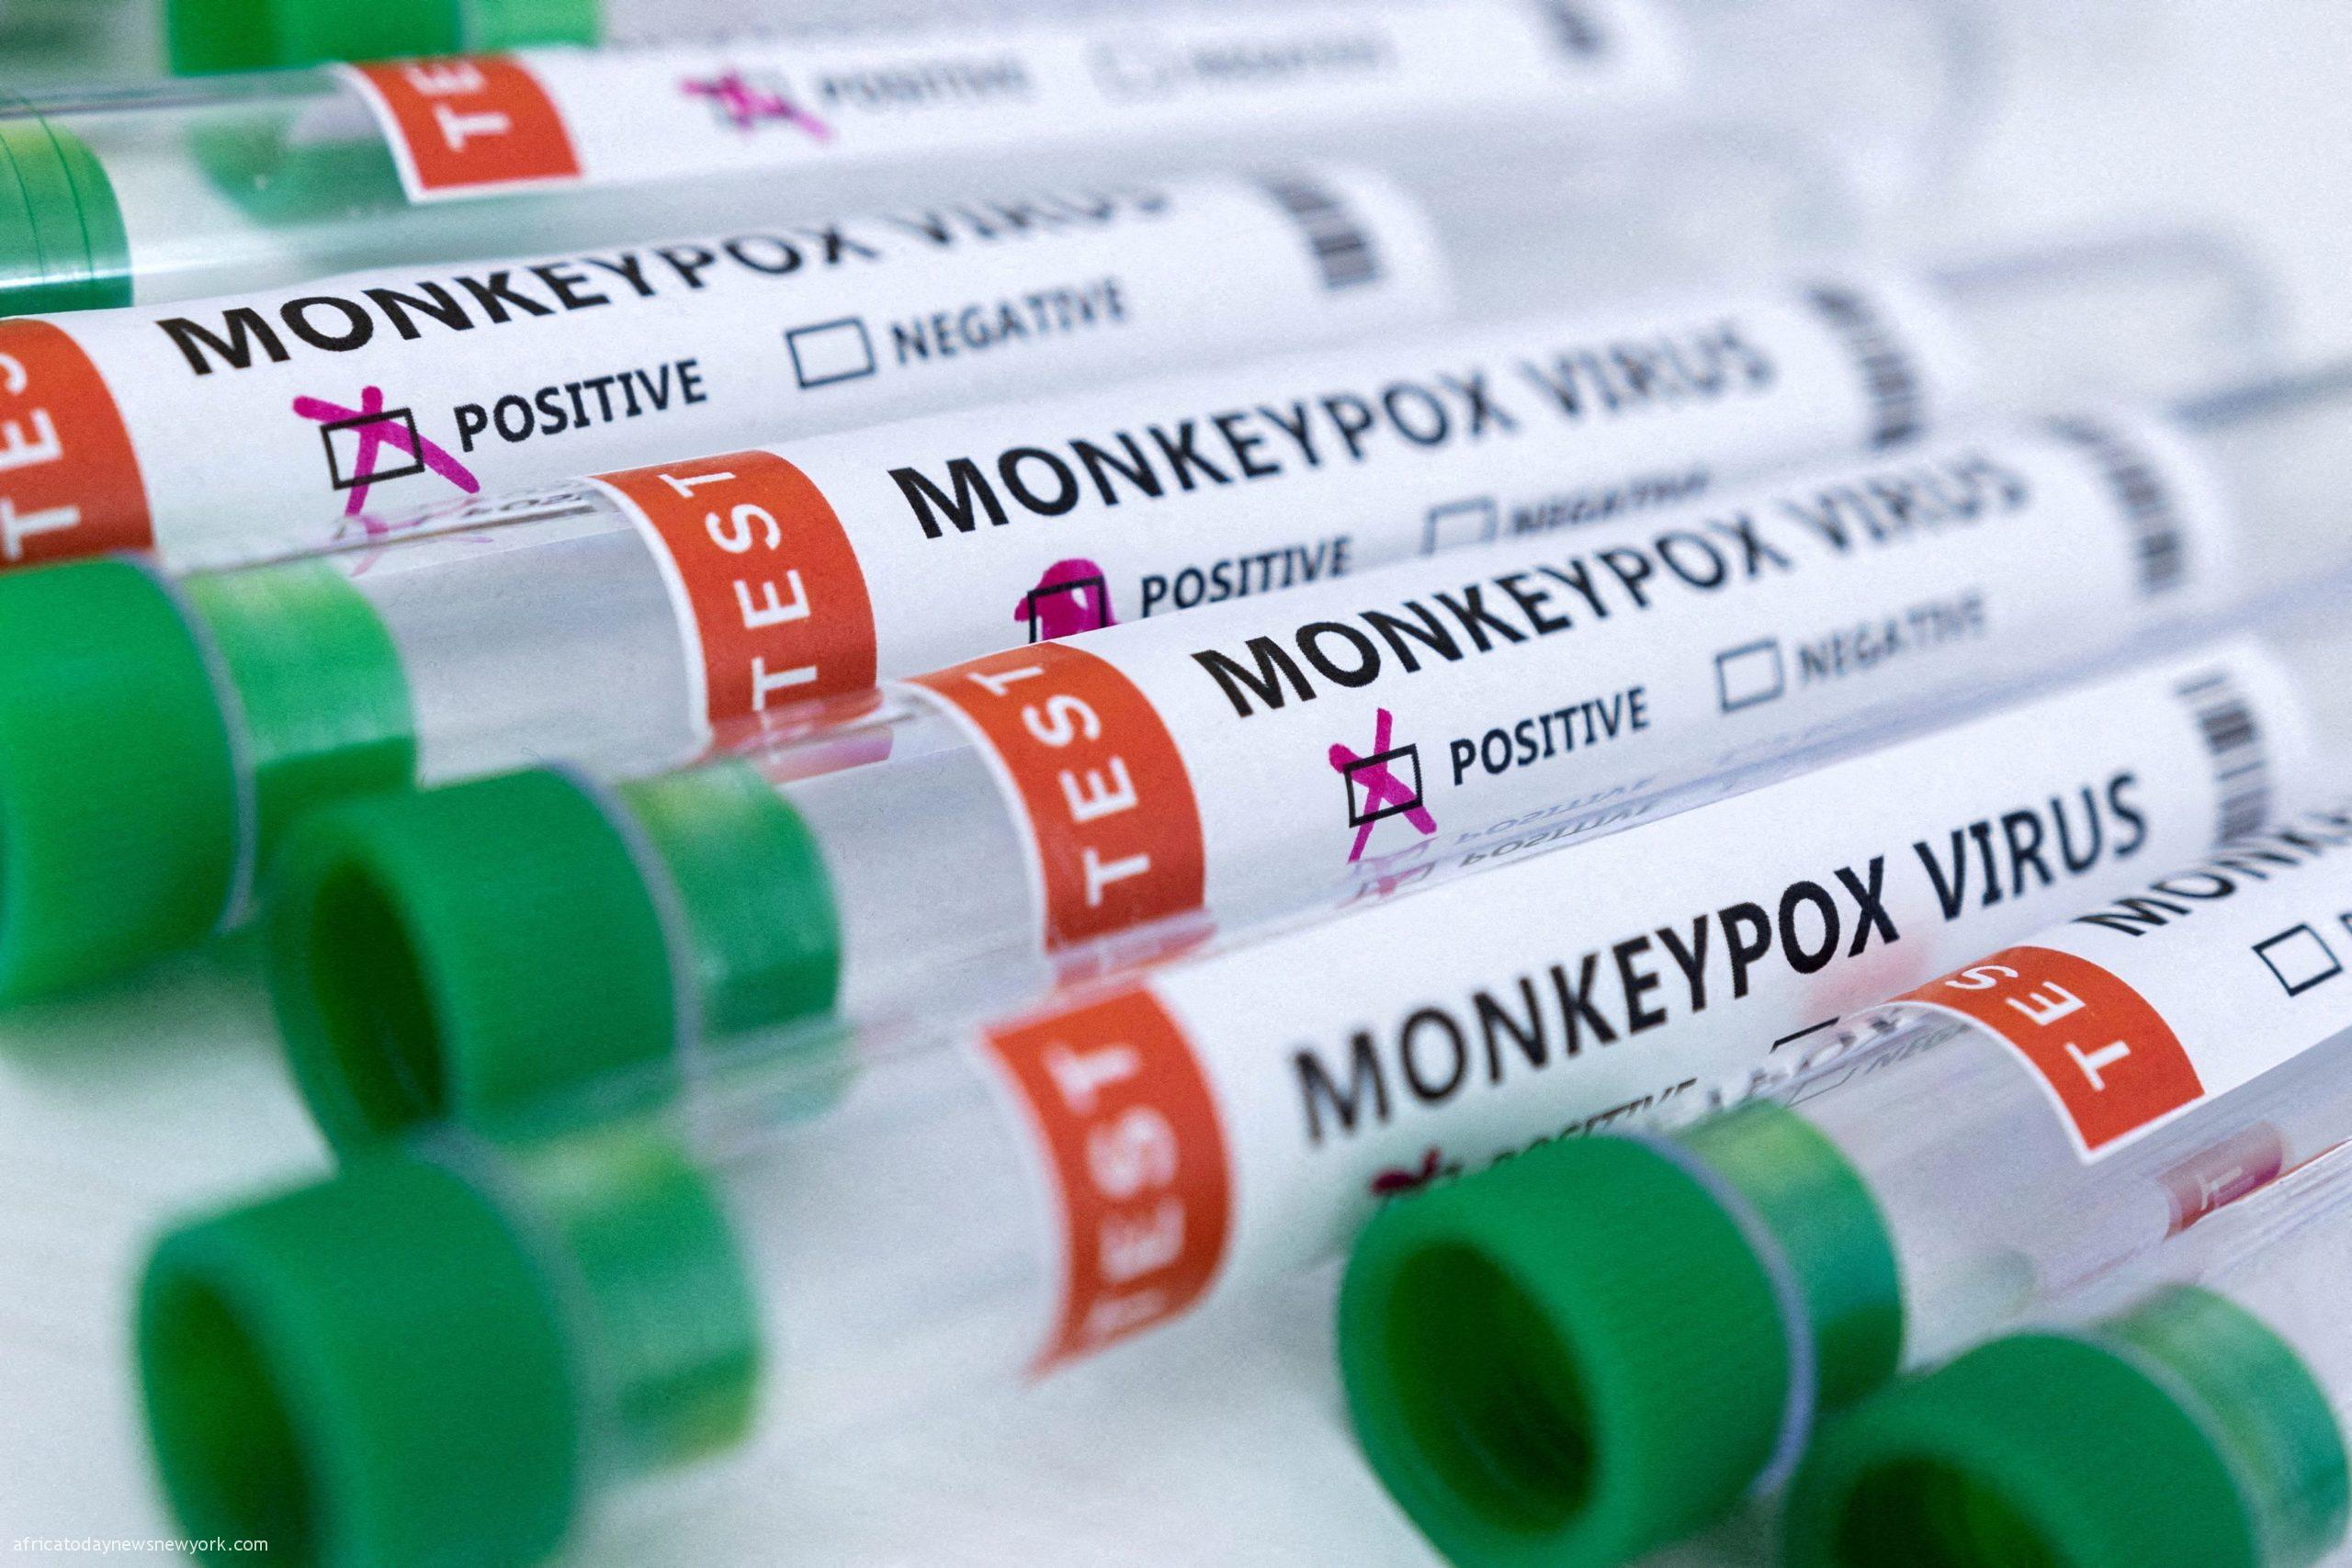 Fresh Fears As Monkeypox Cases Rise, Spread To 26 States